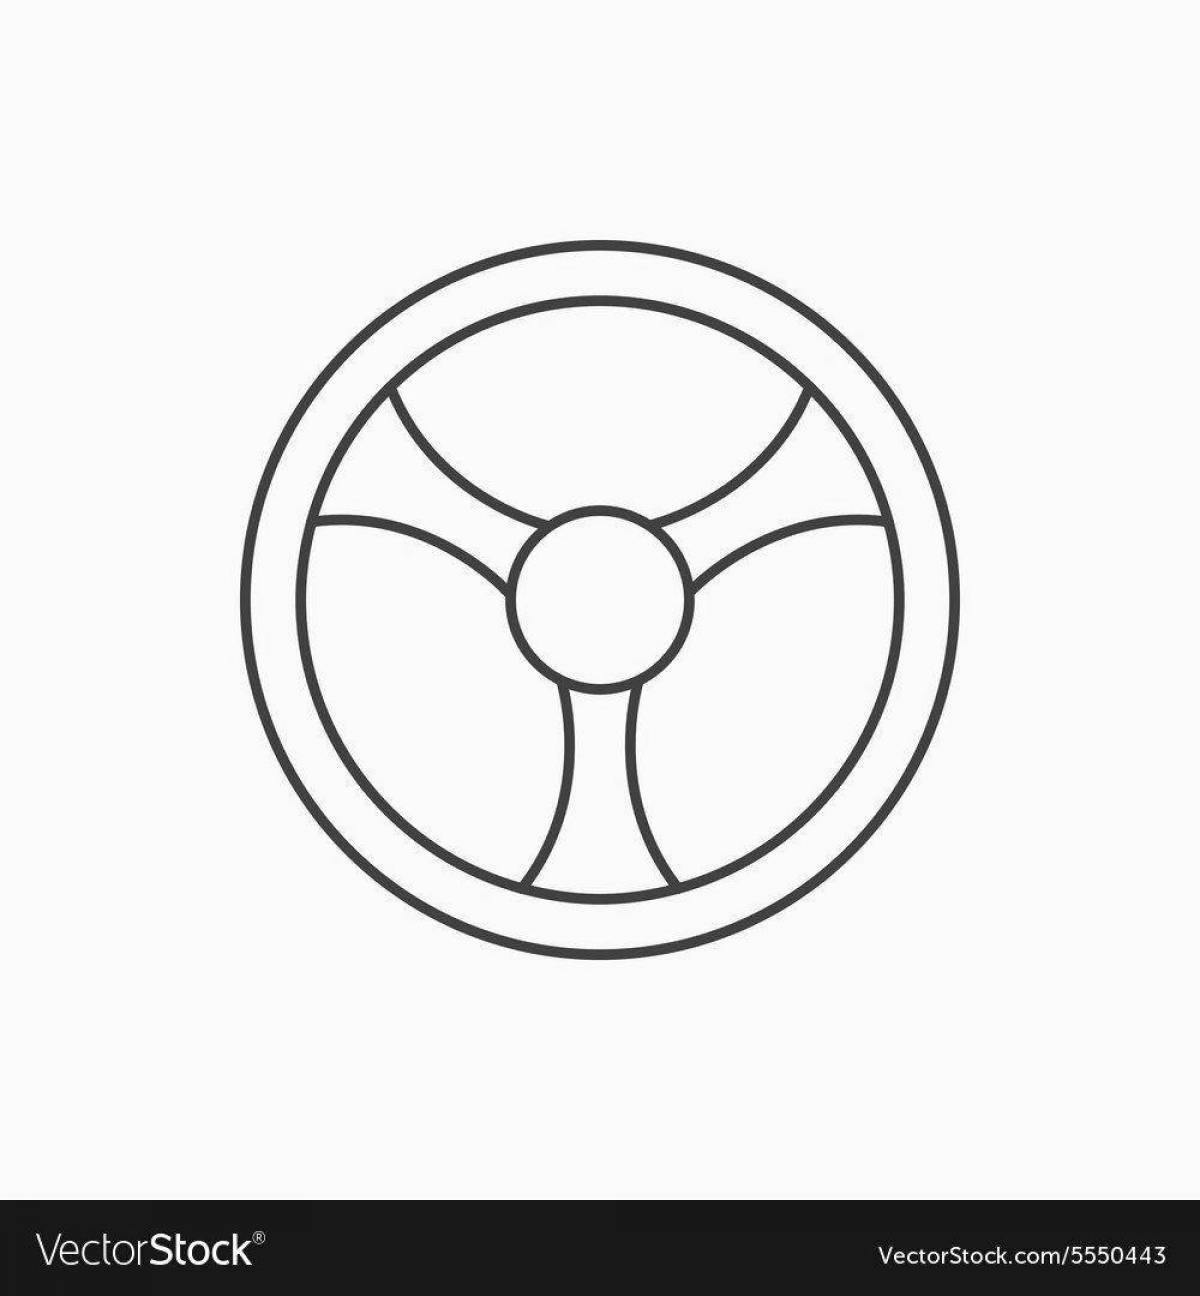 Coloring page funny steering wheel